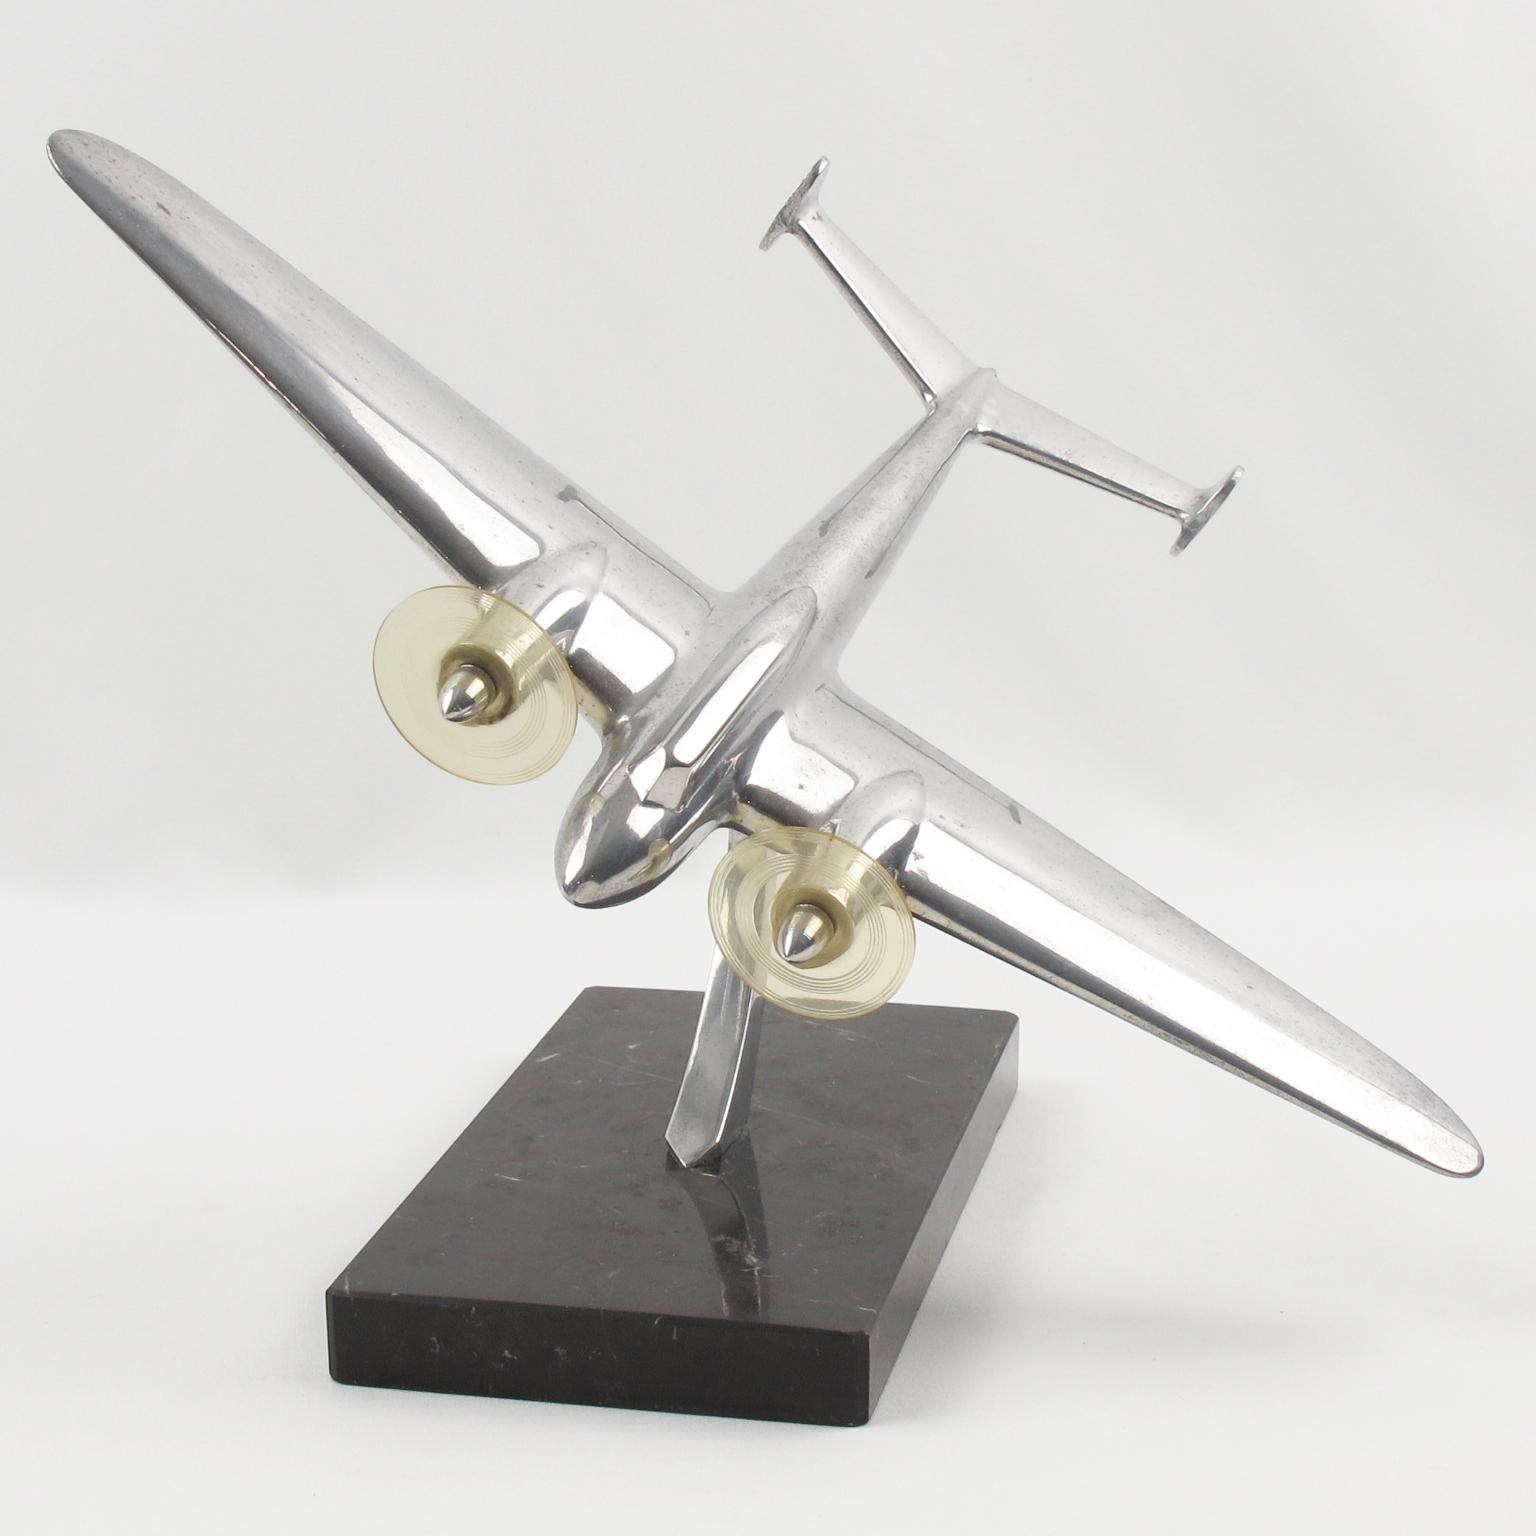 Elegant midcentury French aluminum airplane model, mounted on a marble plinth. This nice sculptural model airplane is made with cast aluminum and has two original Lucite propellers. Standing on a geometric marble plinth in black and white swirled